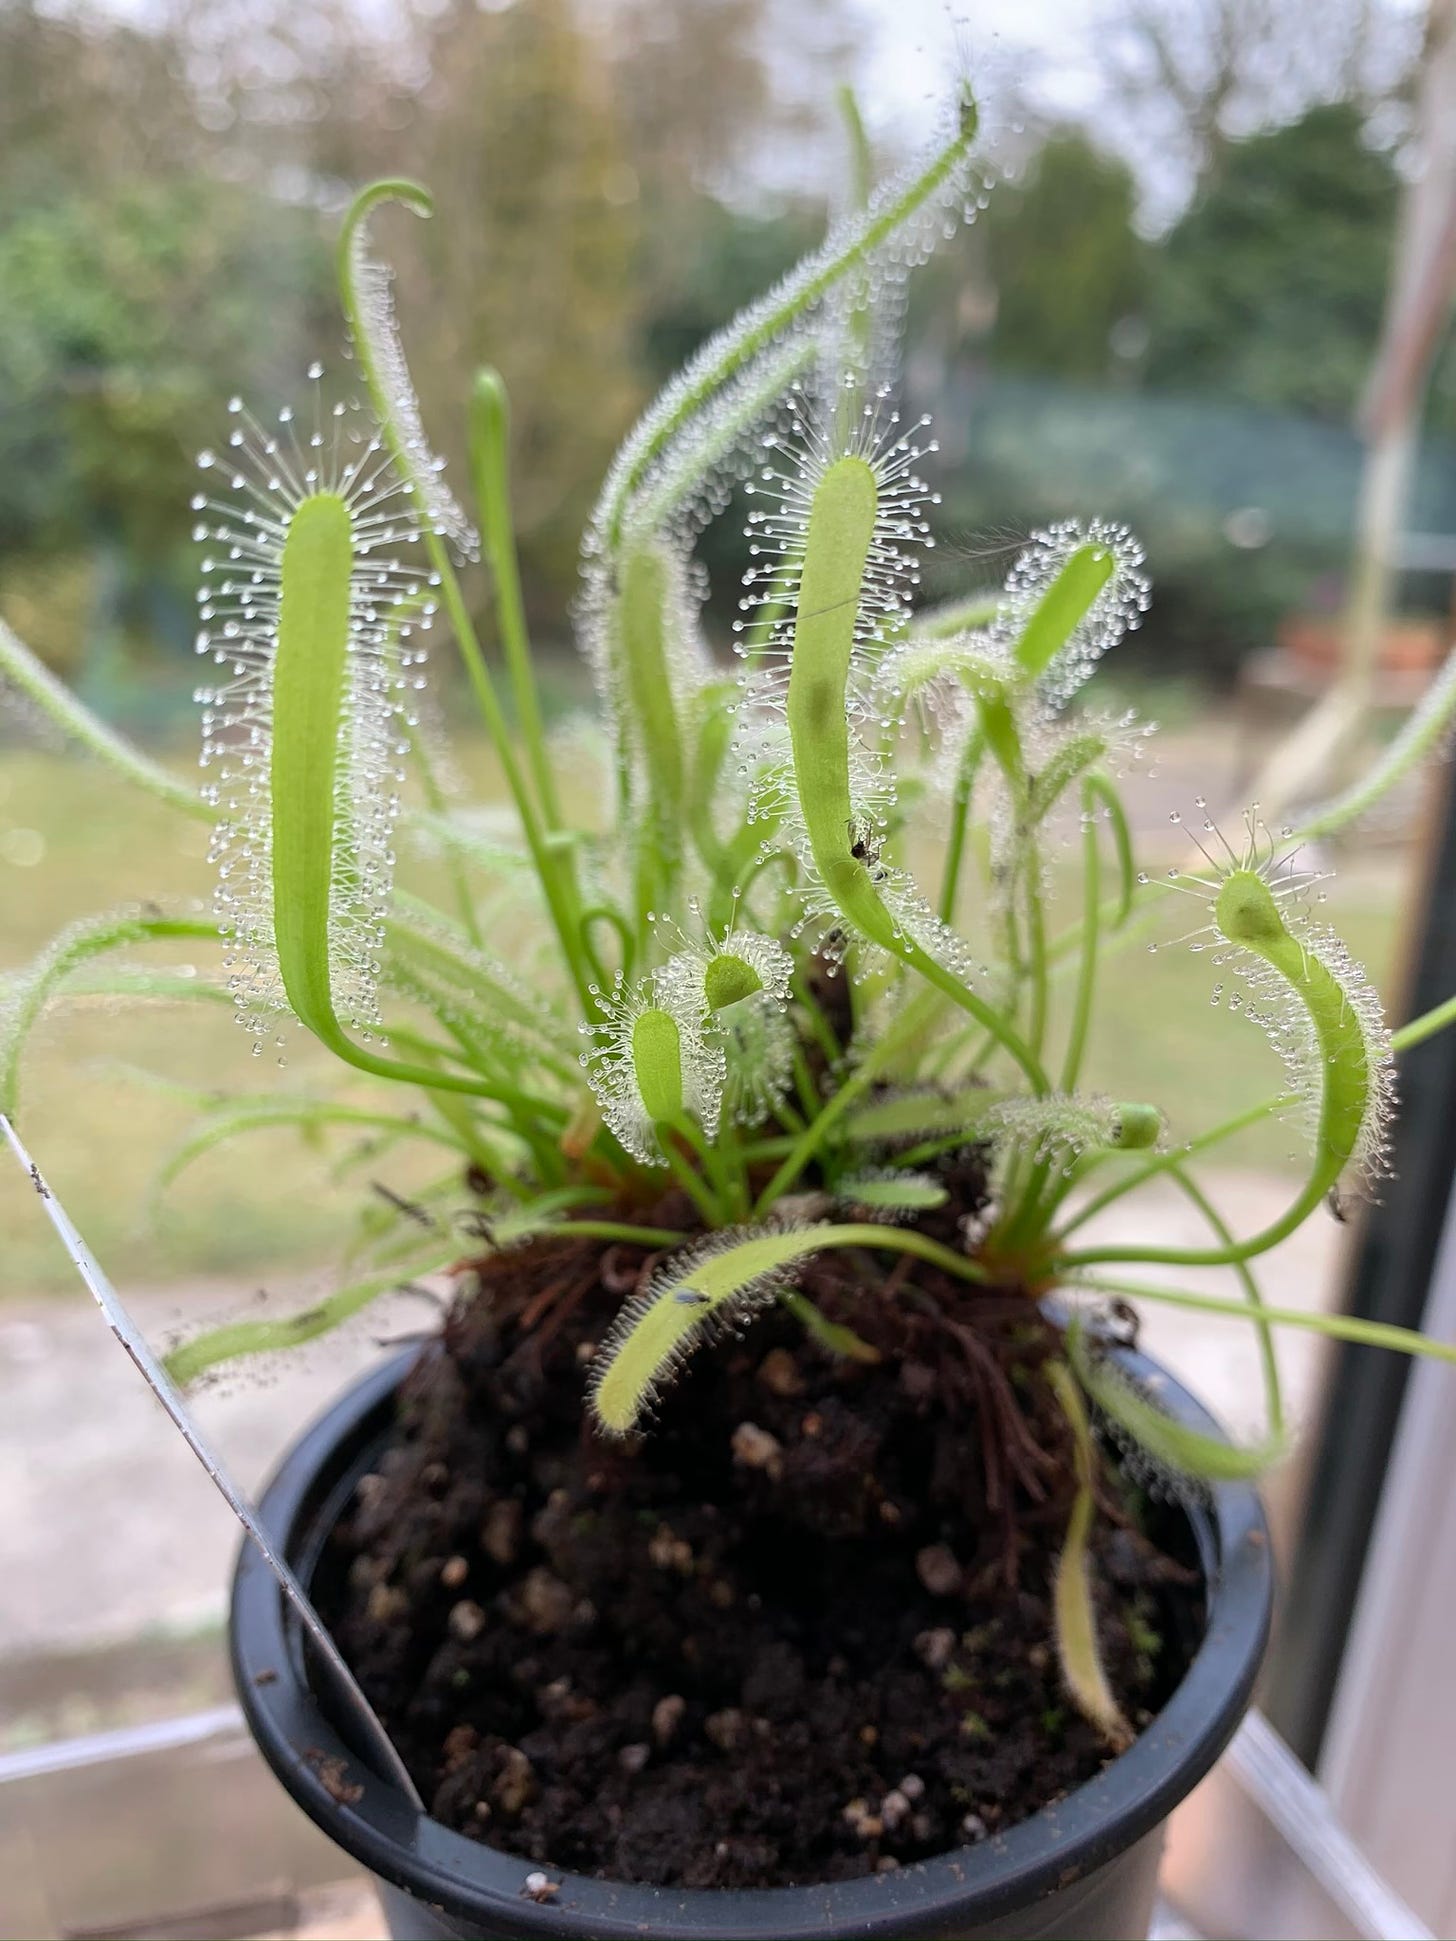 A Drosera capensis (sundew) plant in a pot, with two flies captured in its sticky leaves